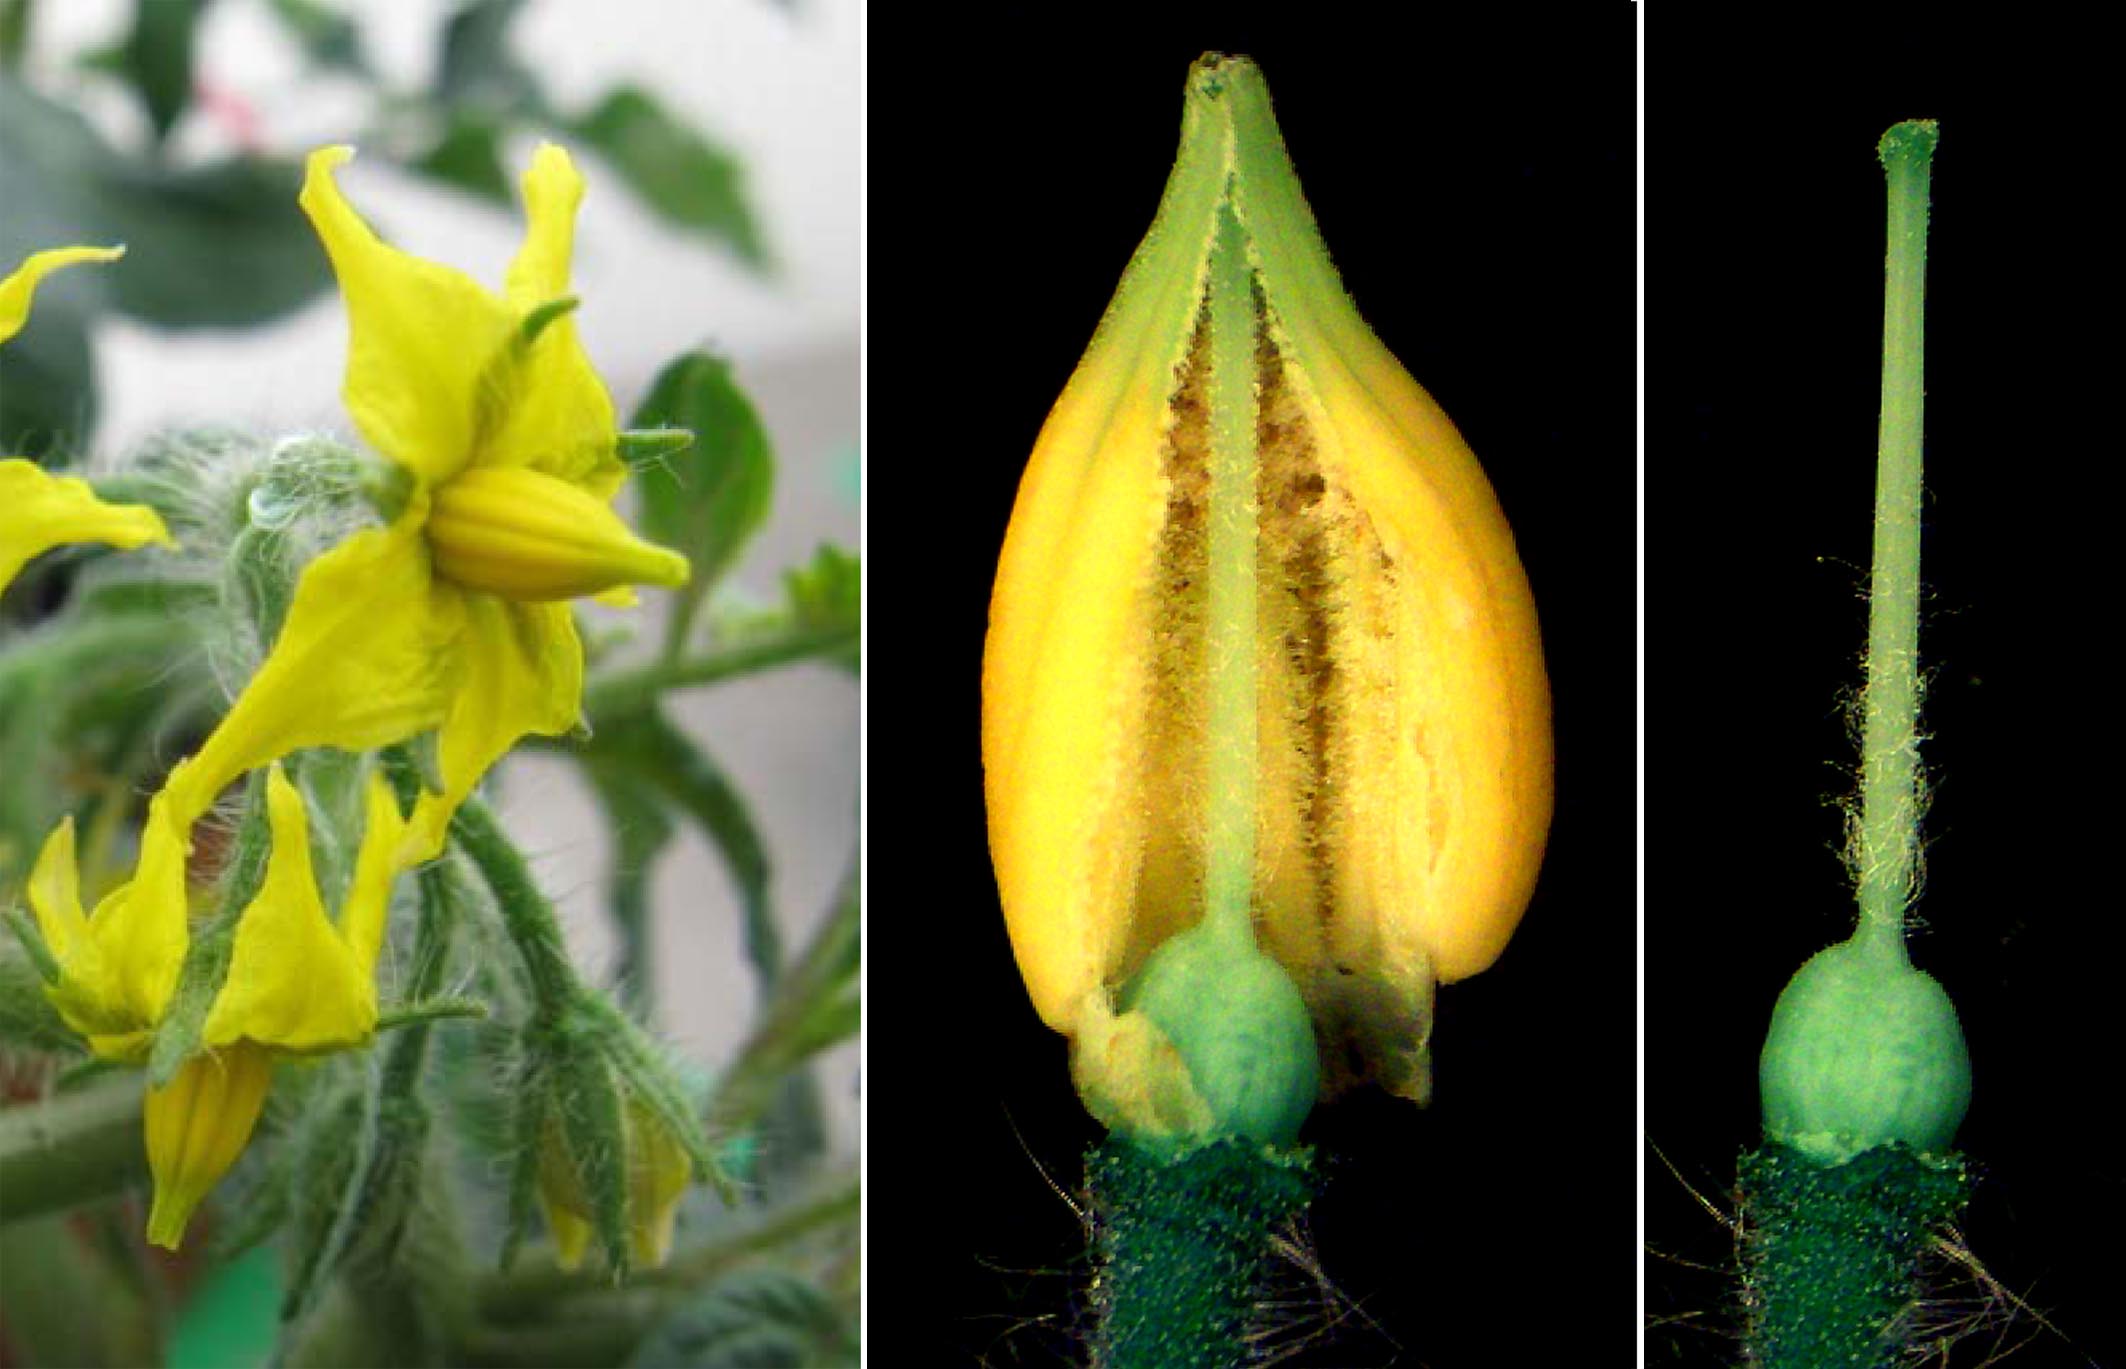 Figure: Tomato flowers and gametophytic organs (mechanically opened stamen crown [middle] and dissected ovary [right])